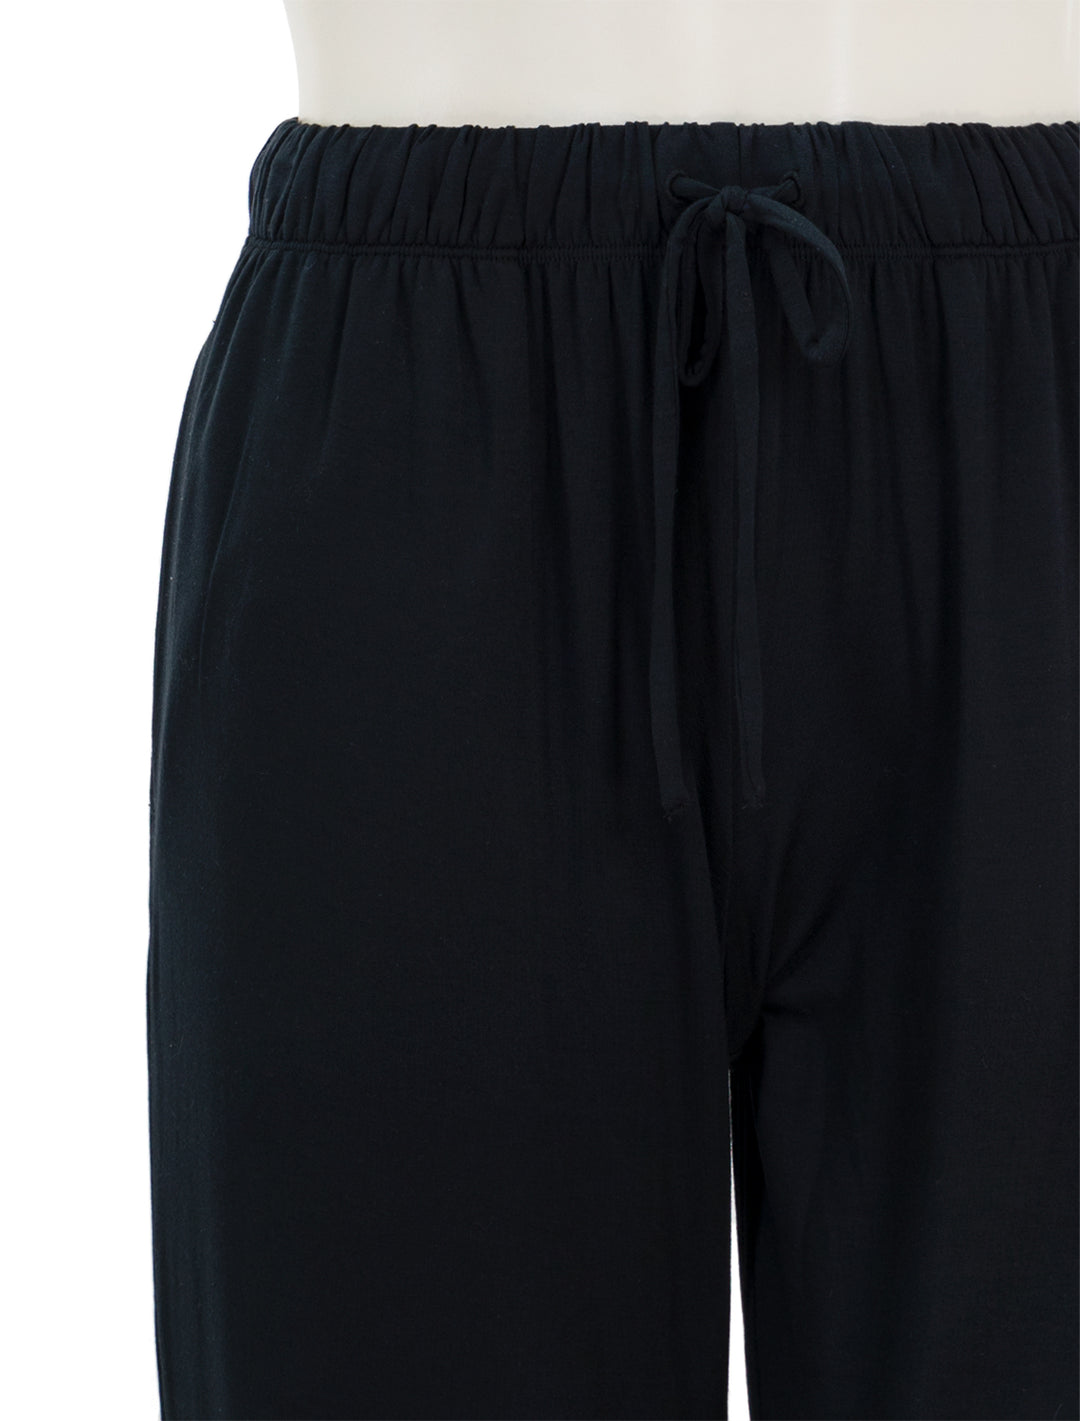 Close-up view of Eberjey's gisele everyday pant in black.